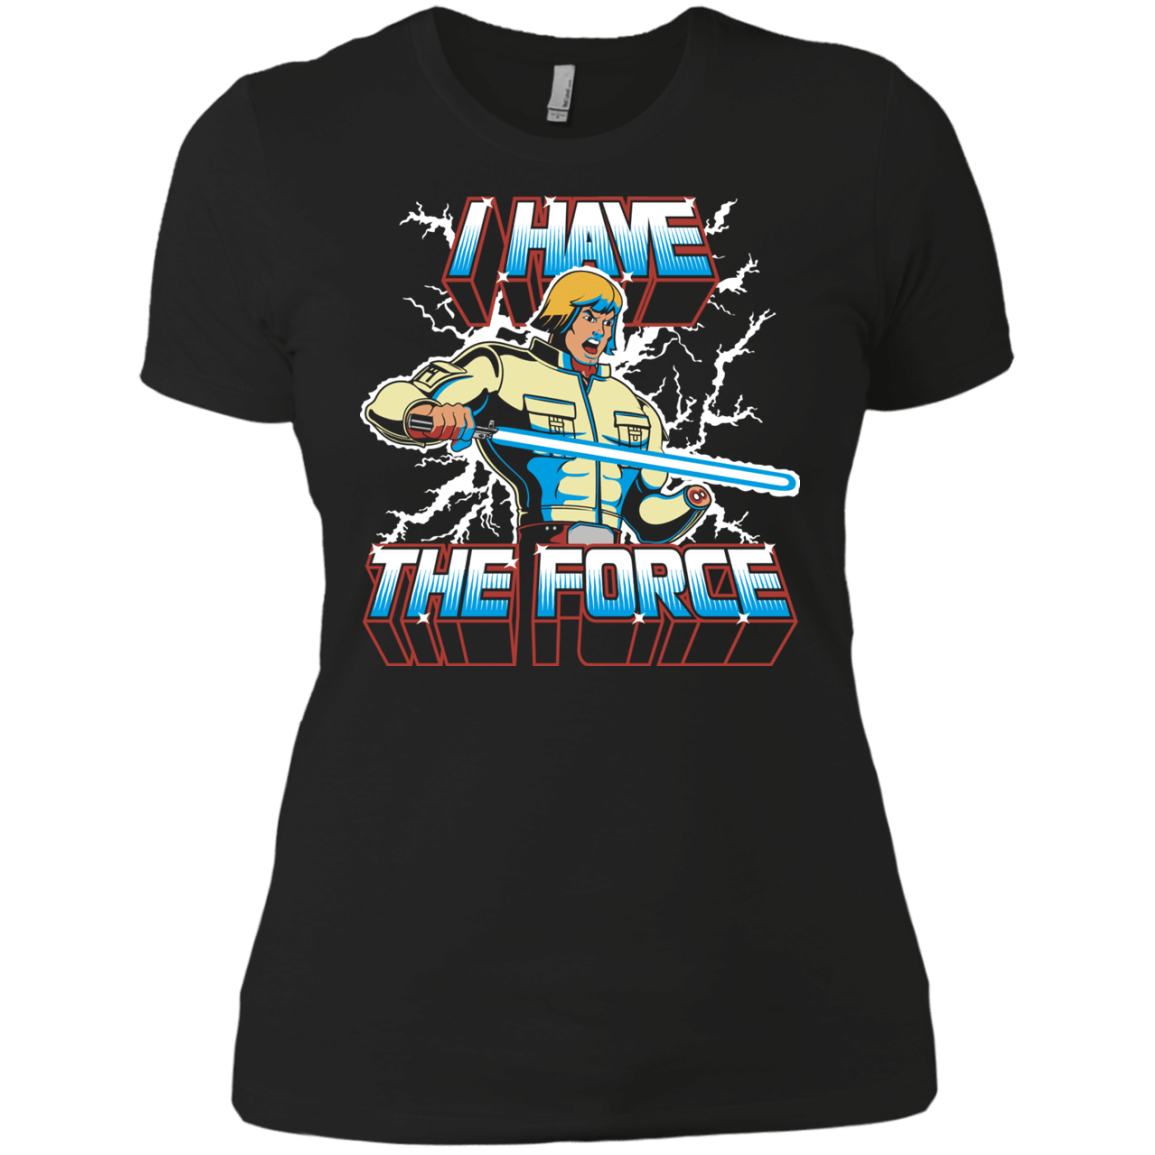 T-Shirts Black / X-Small I Have the Force Women's Premium T-Shirt